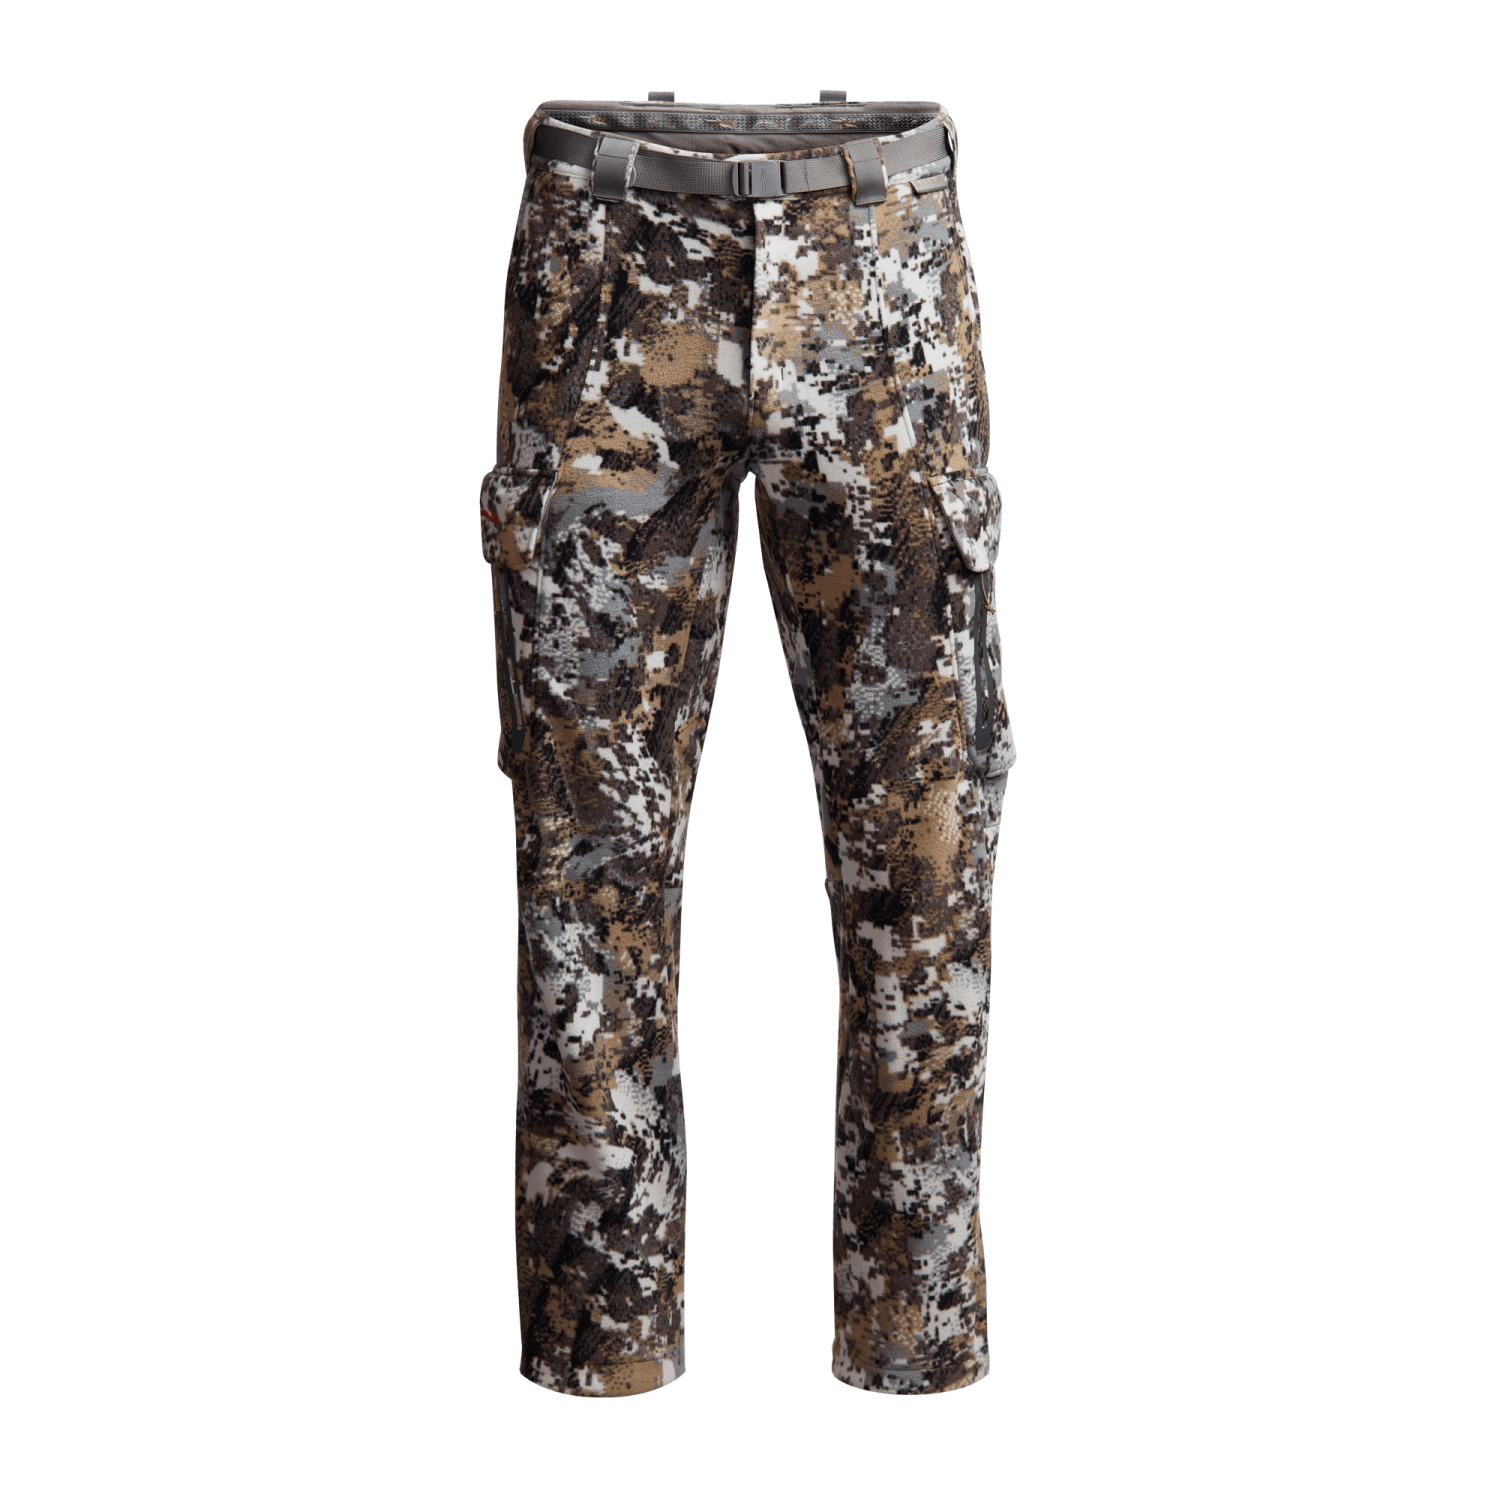 Sitka Stratus Pants review with the Elevated II camo version.